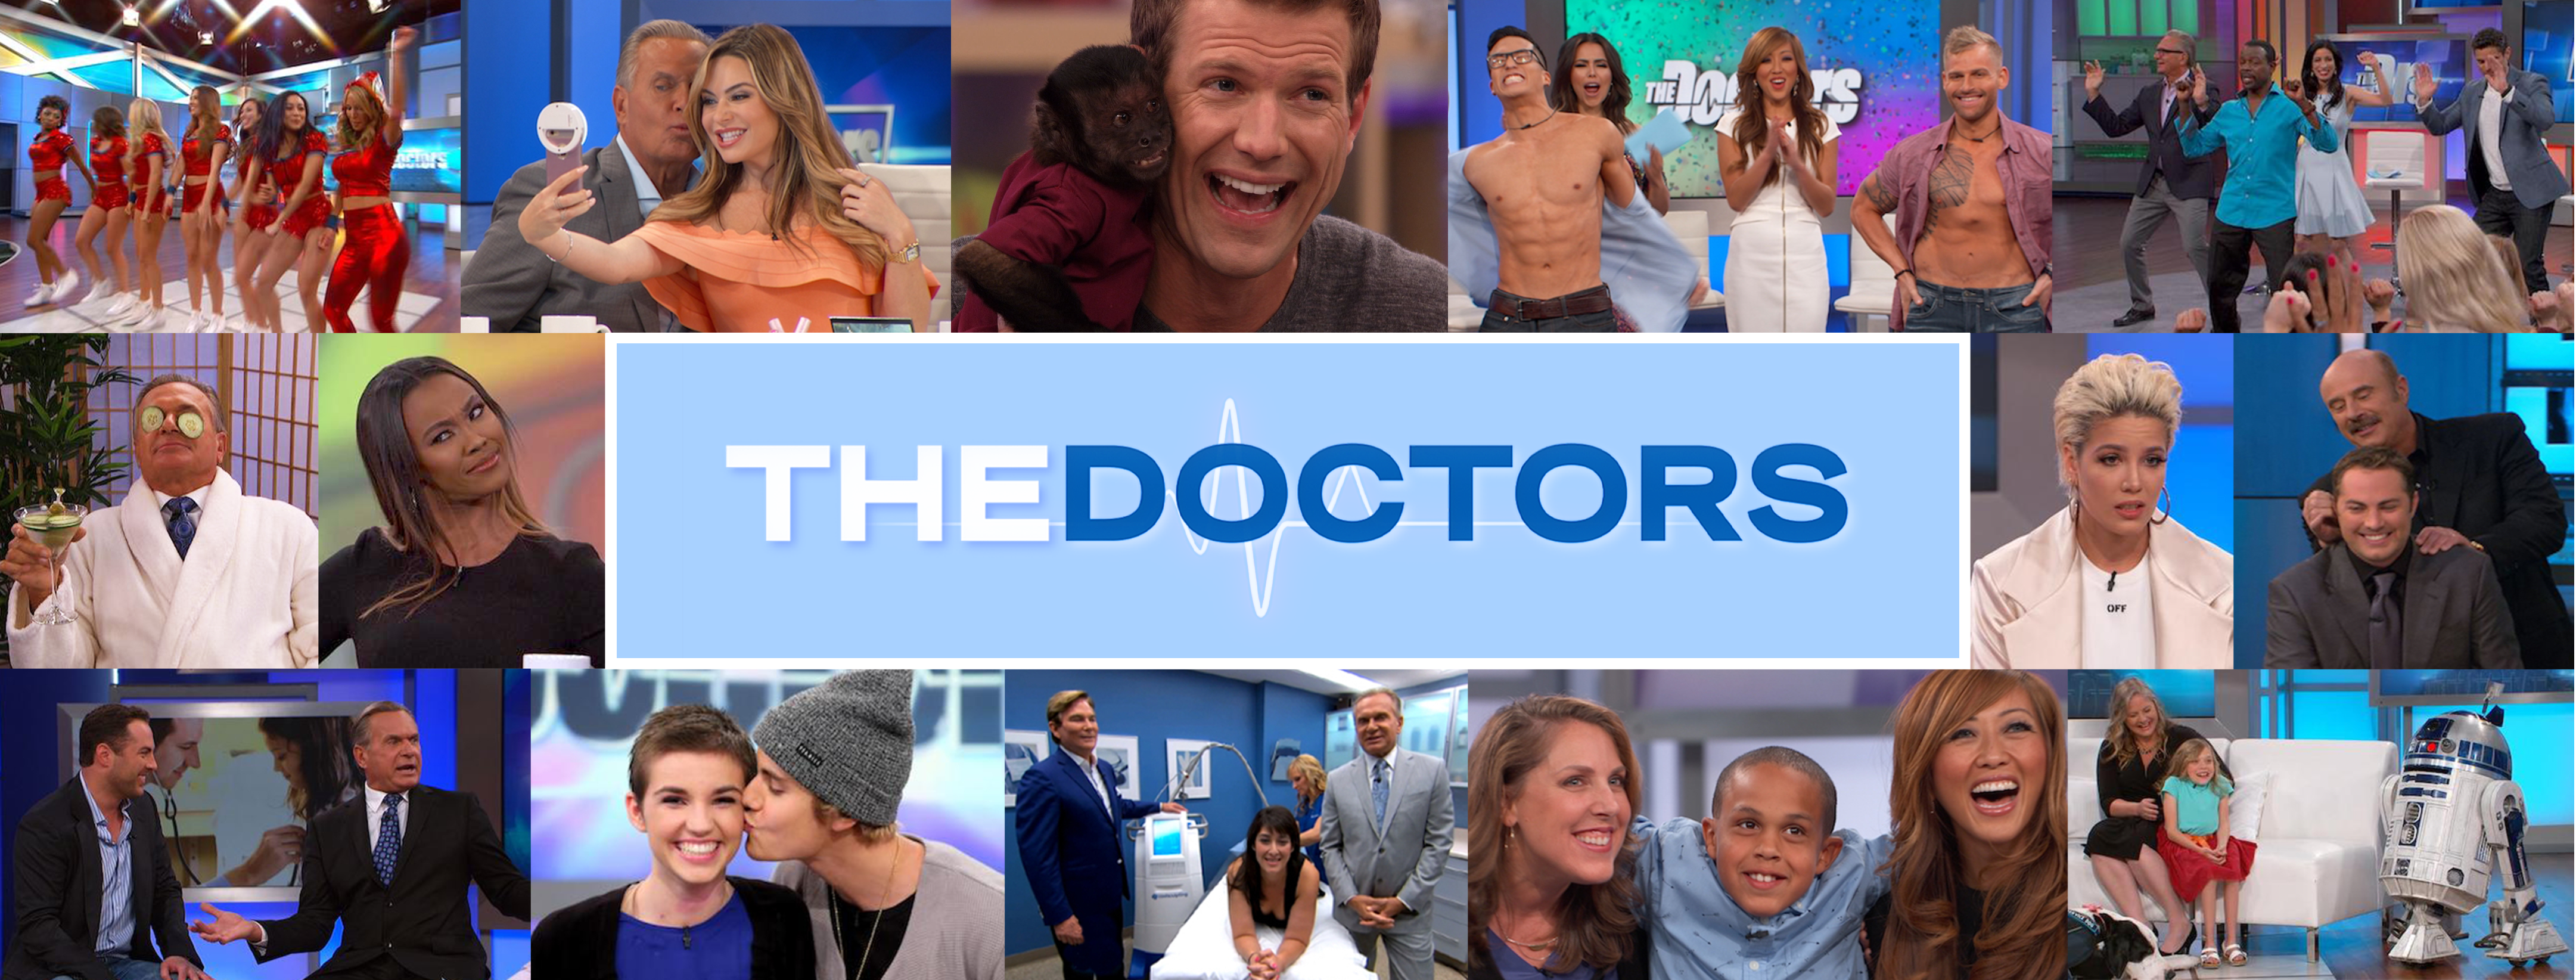 The doctors with the headline behind them